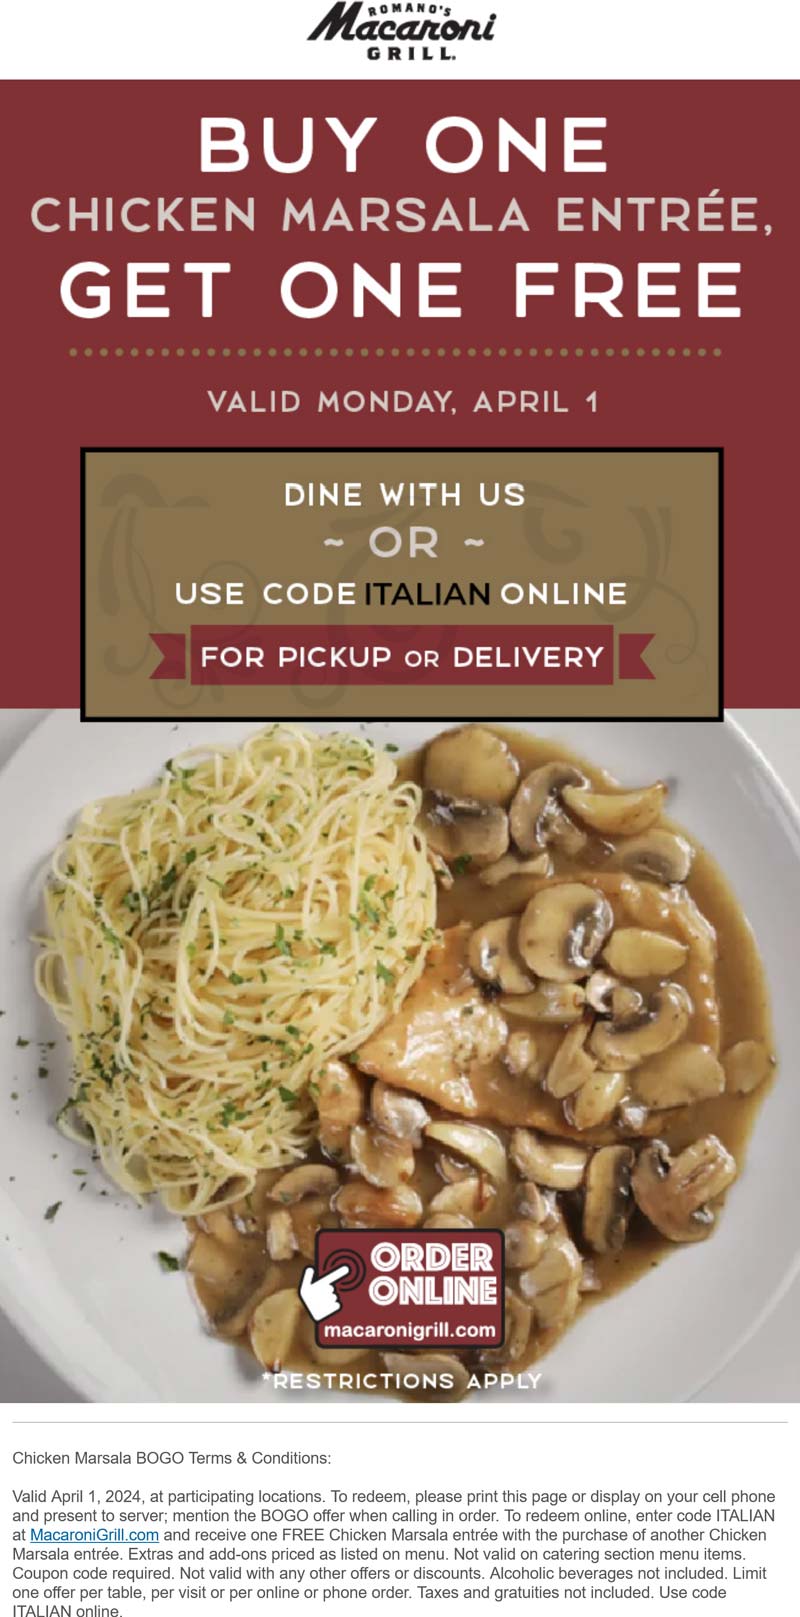 Macaroni Grill restaurants Coupon  Second chicken marsala entree free today at Macaroni Grill #macaronigrill 